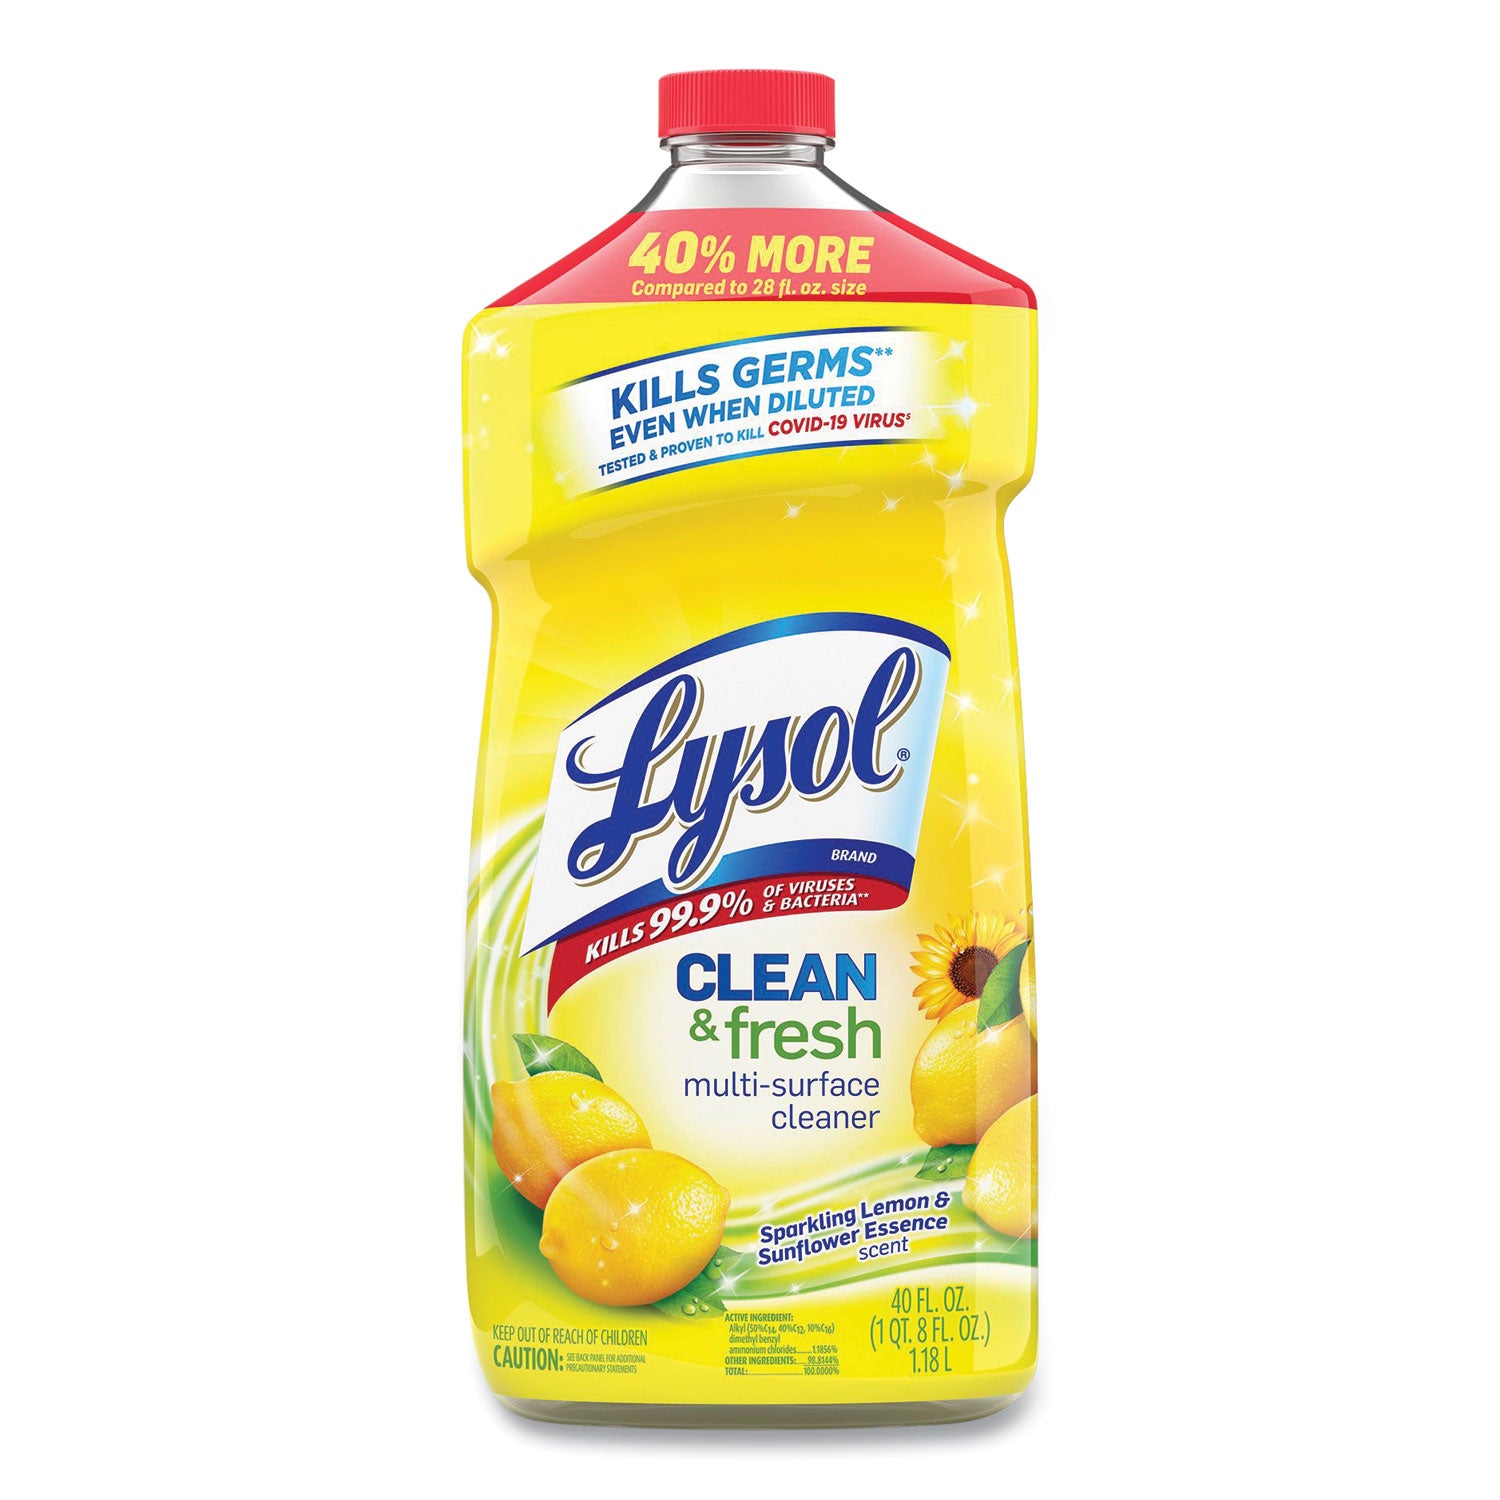 clean-and-fresh-multi-surface-cleaner-sparkling-lemon-and-sunflower-essence-40-oz-bottle-9-carton_rac78626ct - 2